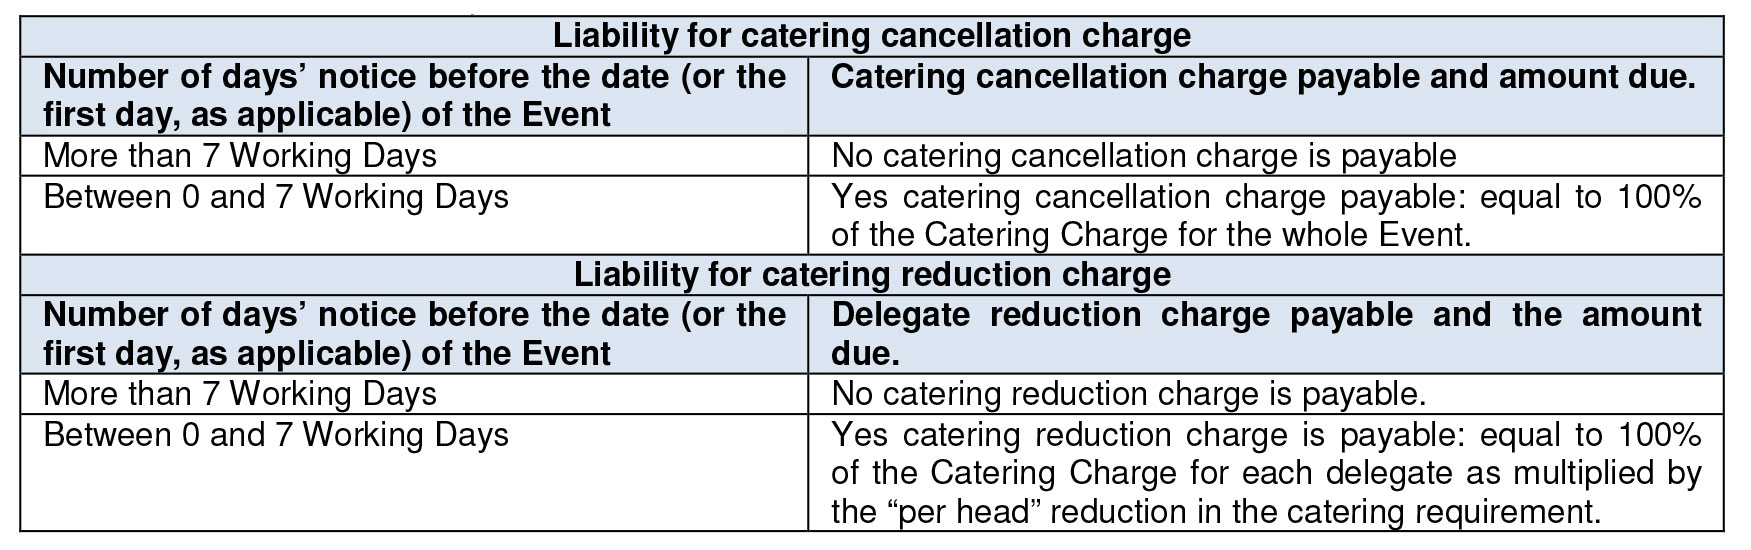 liability for catering cancellation charge